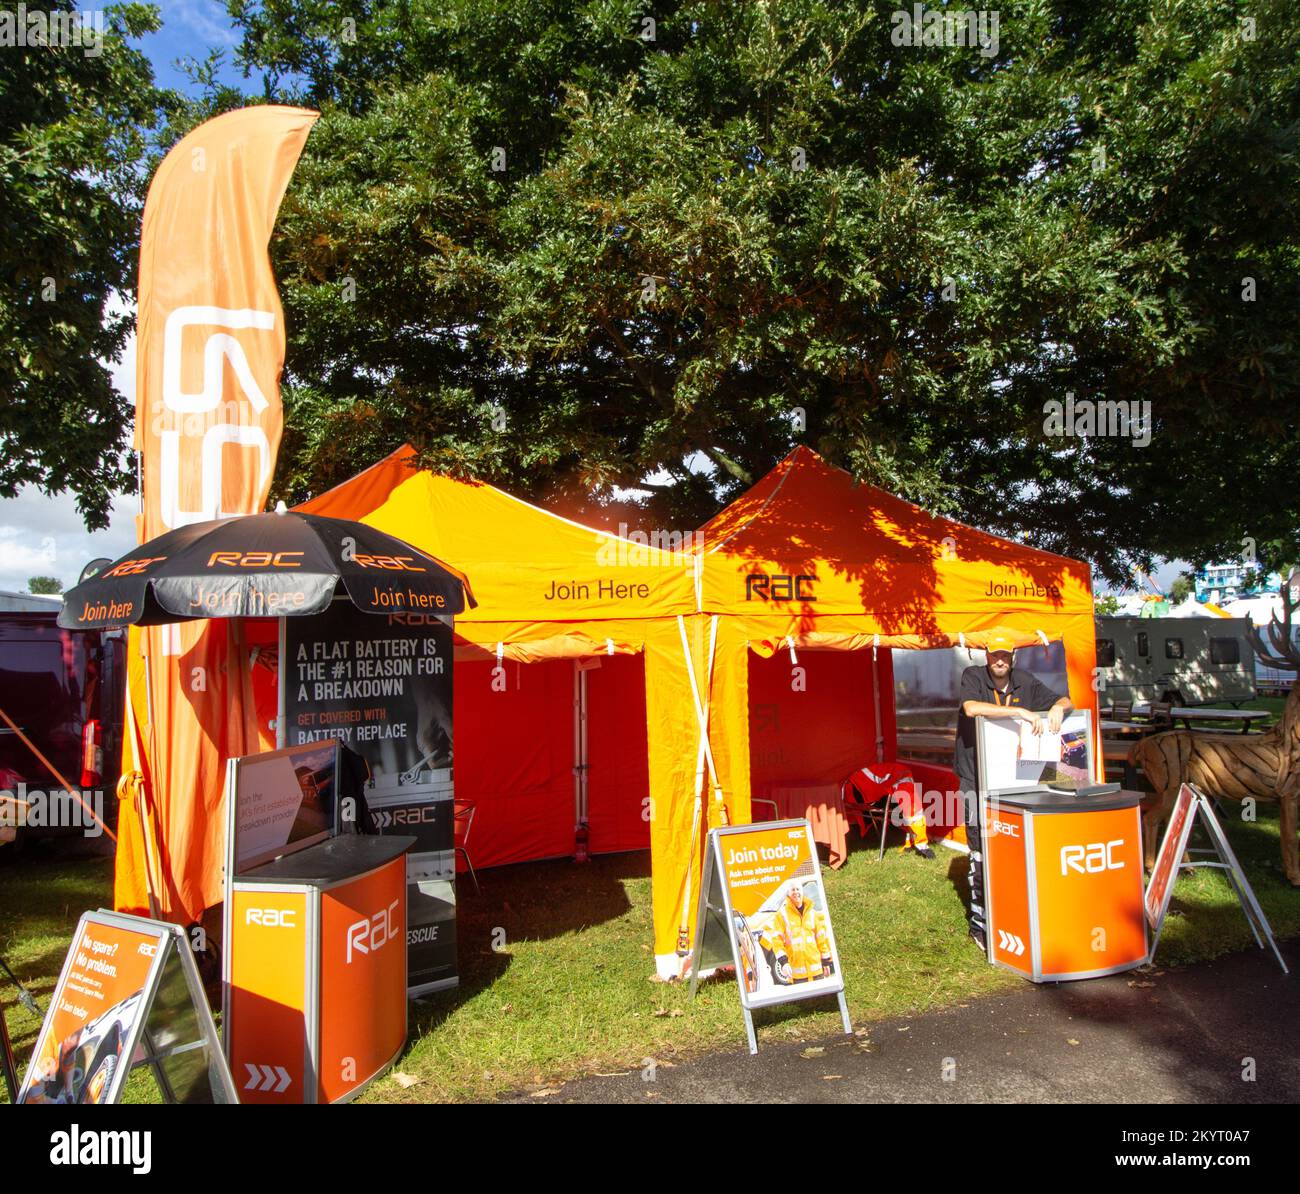 EXETER, DEVON, UK - JULY 1, 2022 trade stand -  RAC join here Stock Photo